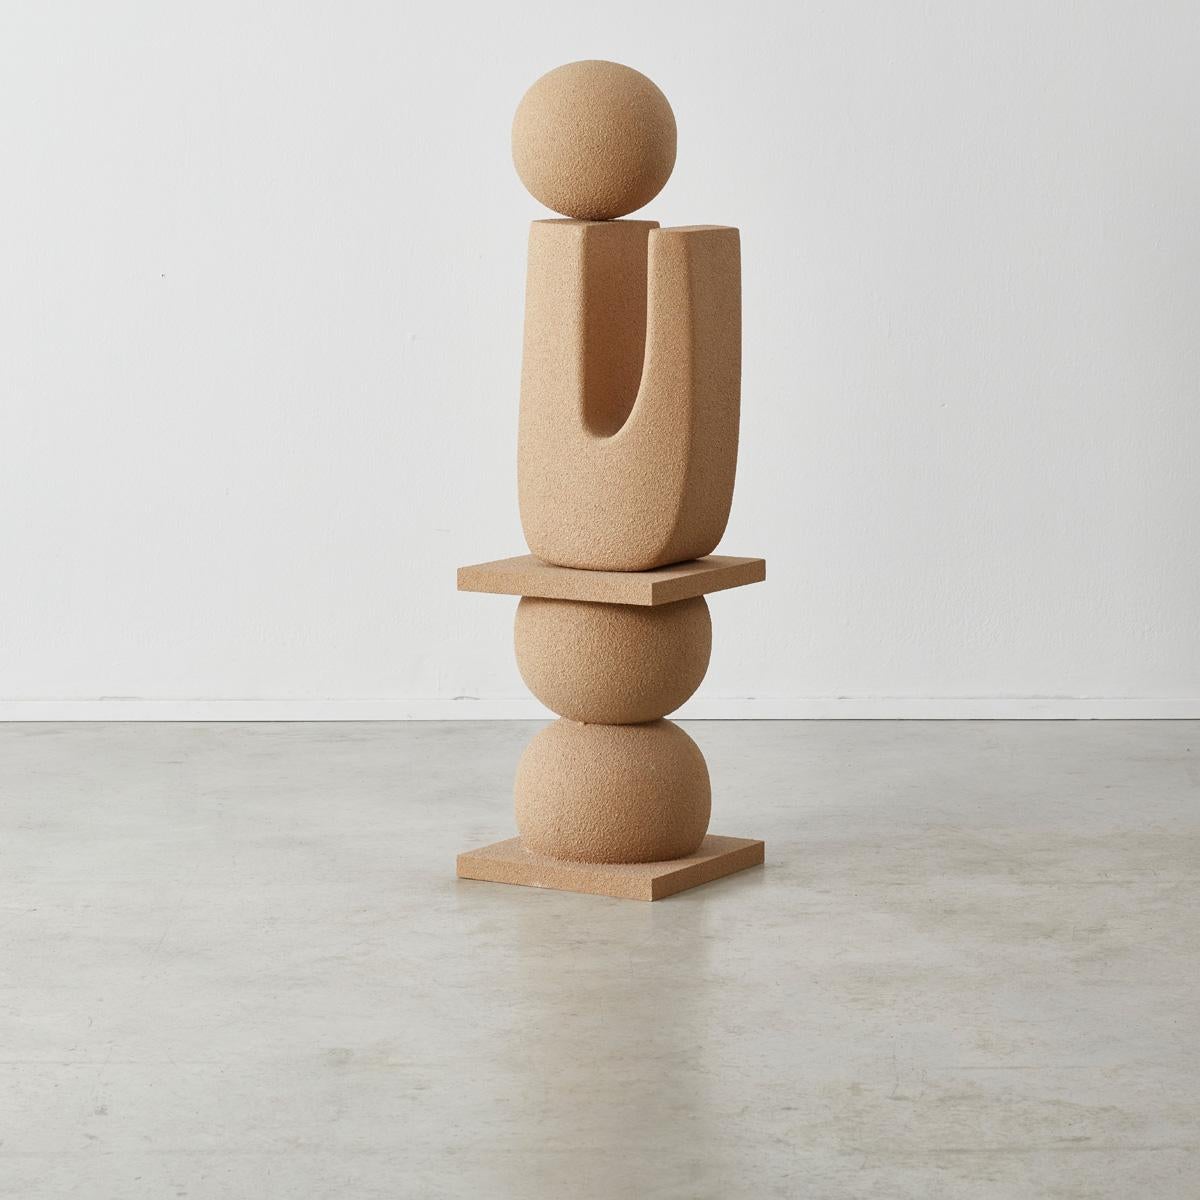 French Abstract TOTEM Sculpture in Sand and Resin, France, c1970